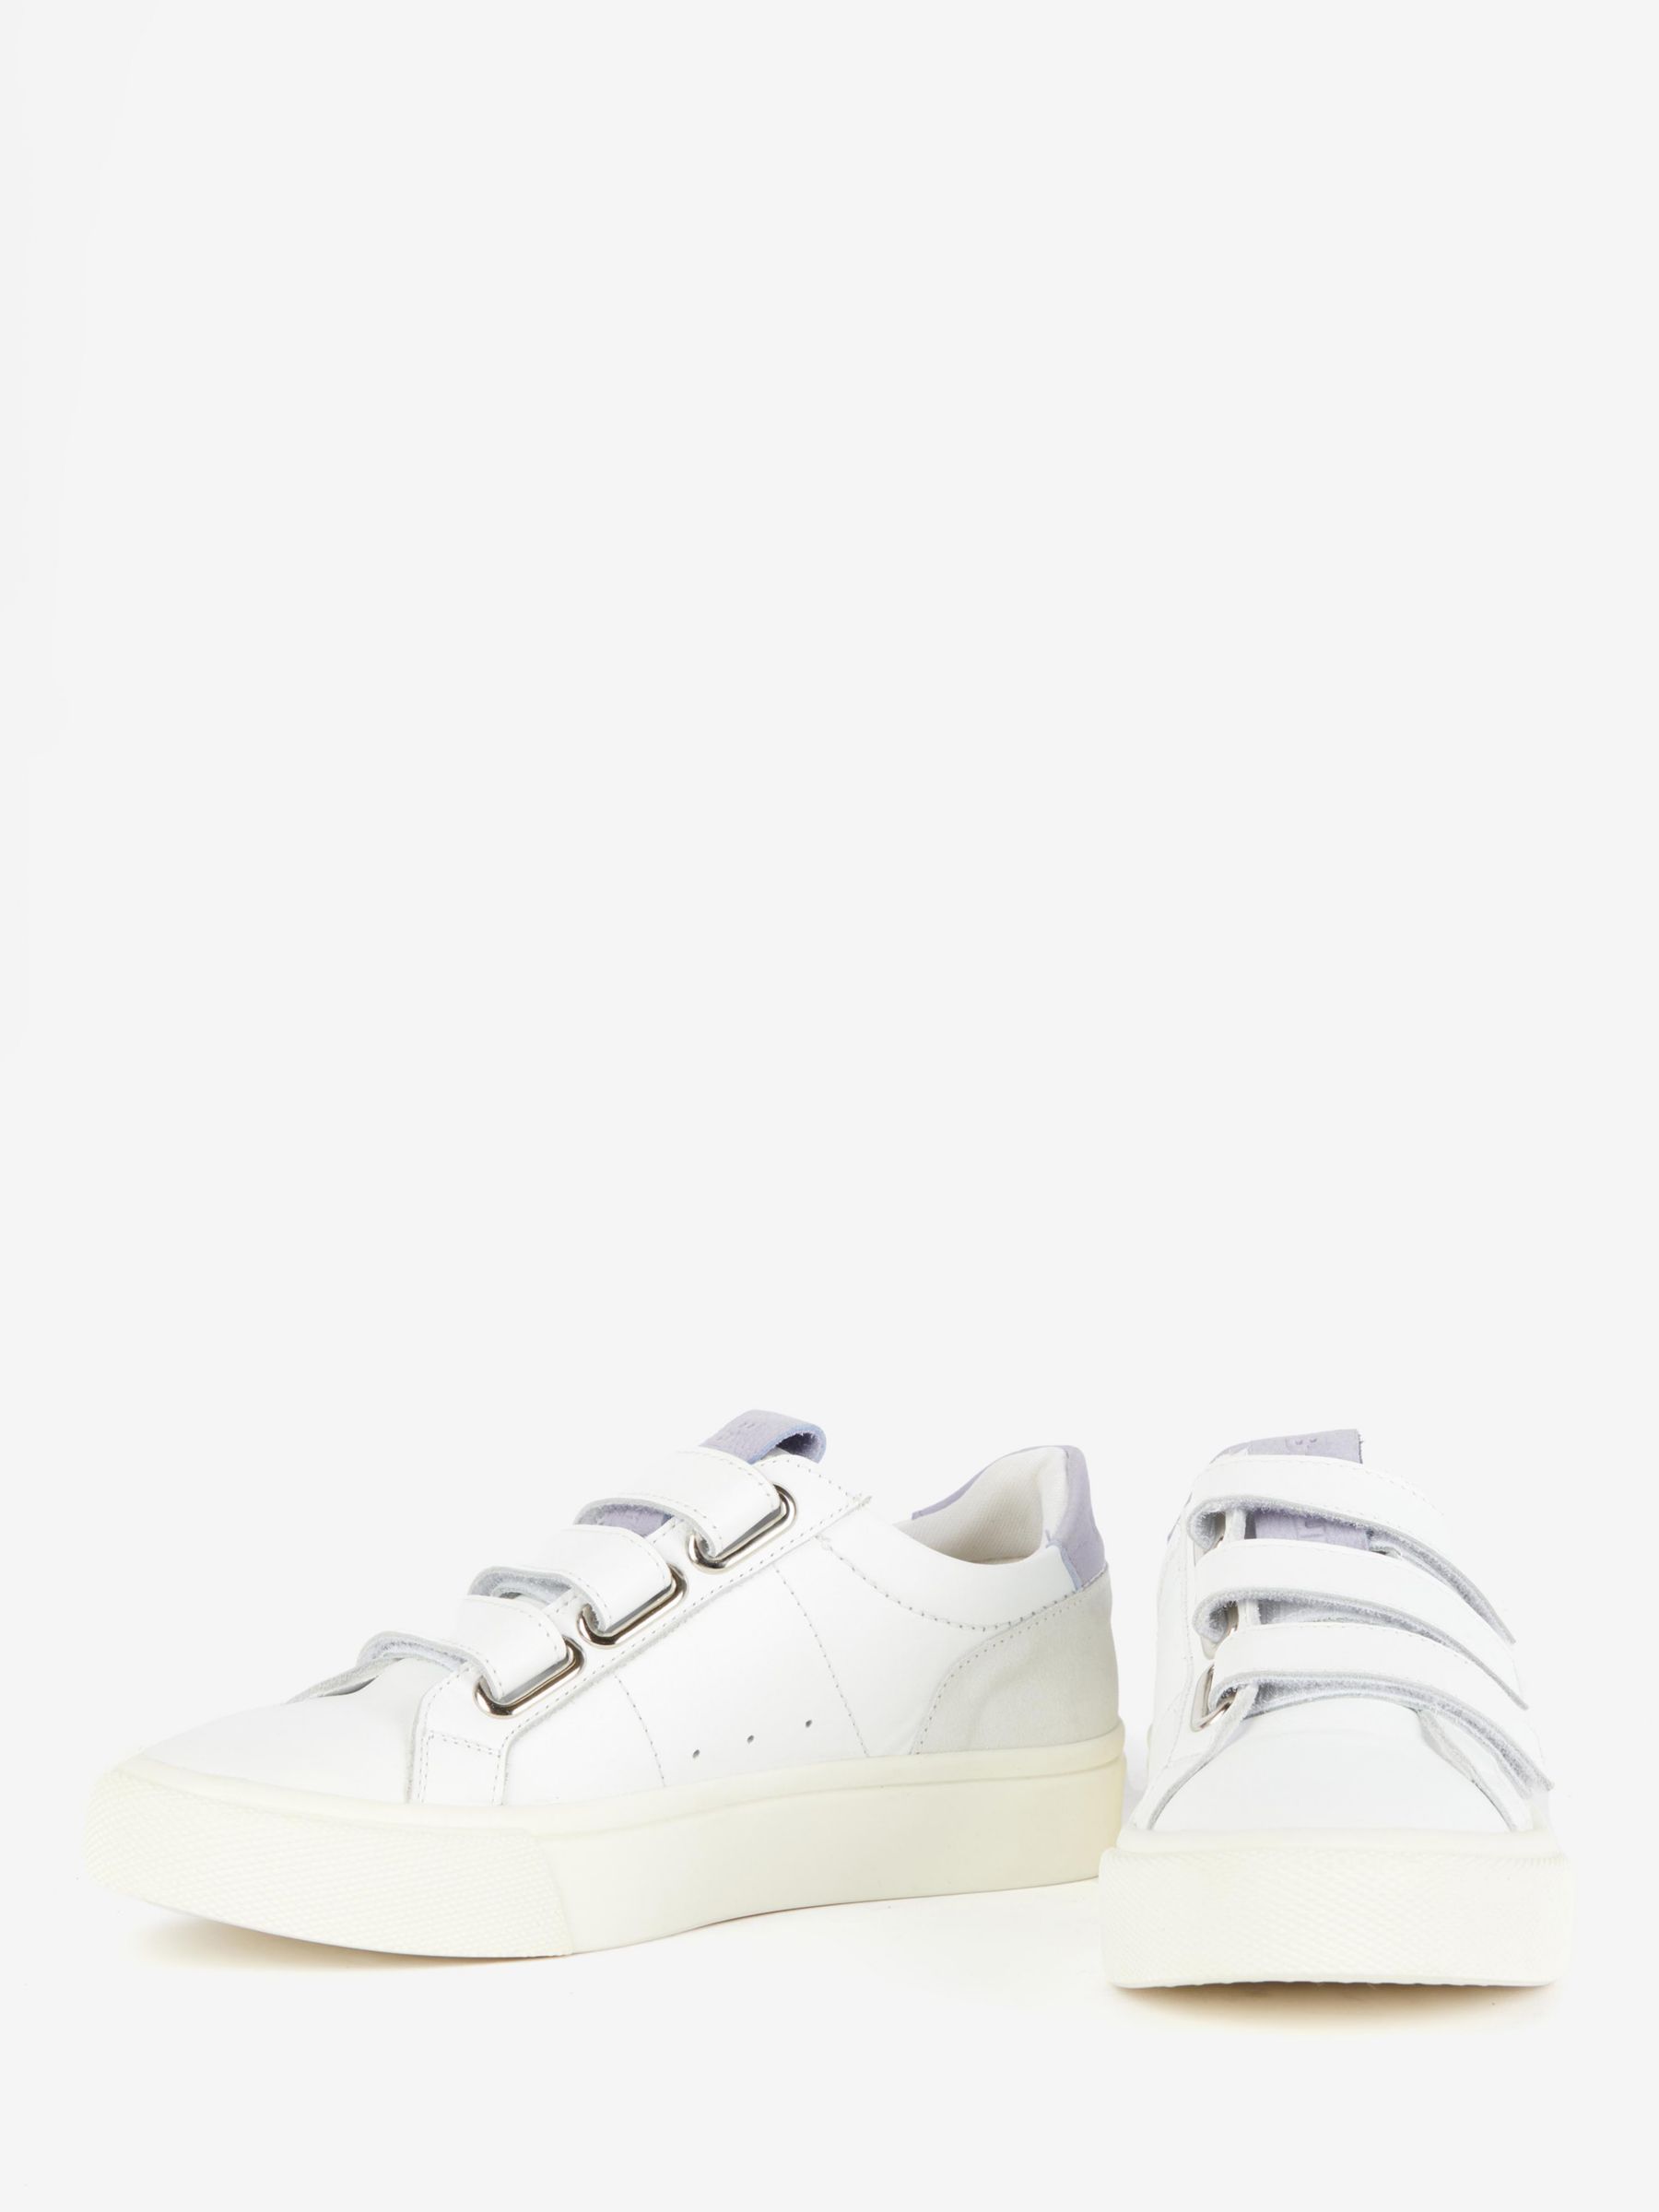 Barbour Georgie Leather Trainers, White/Lavender at John Lewis & Partners